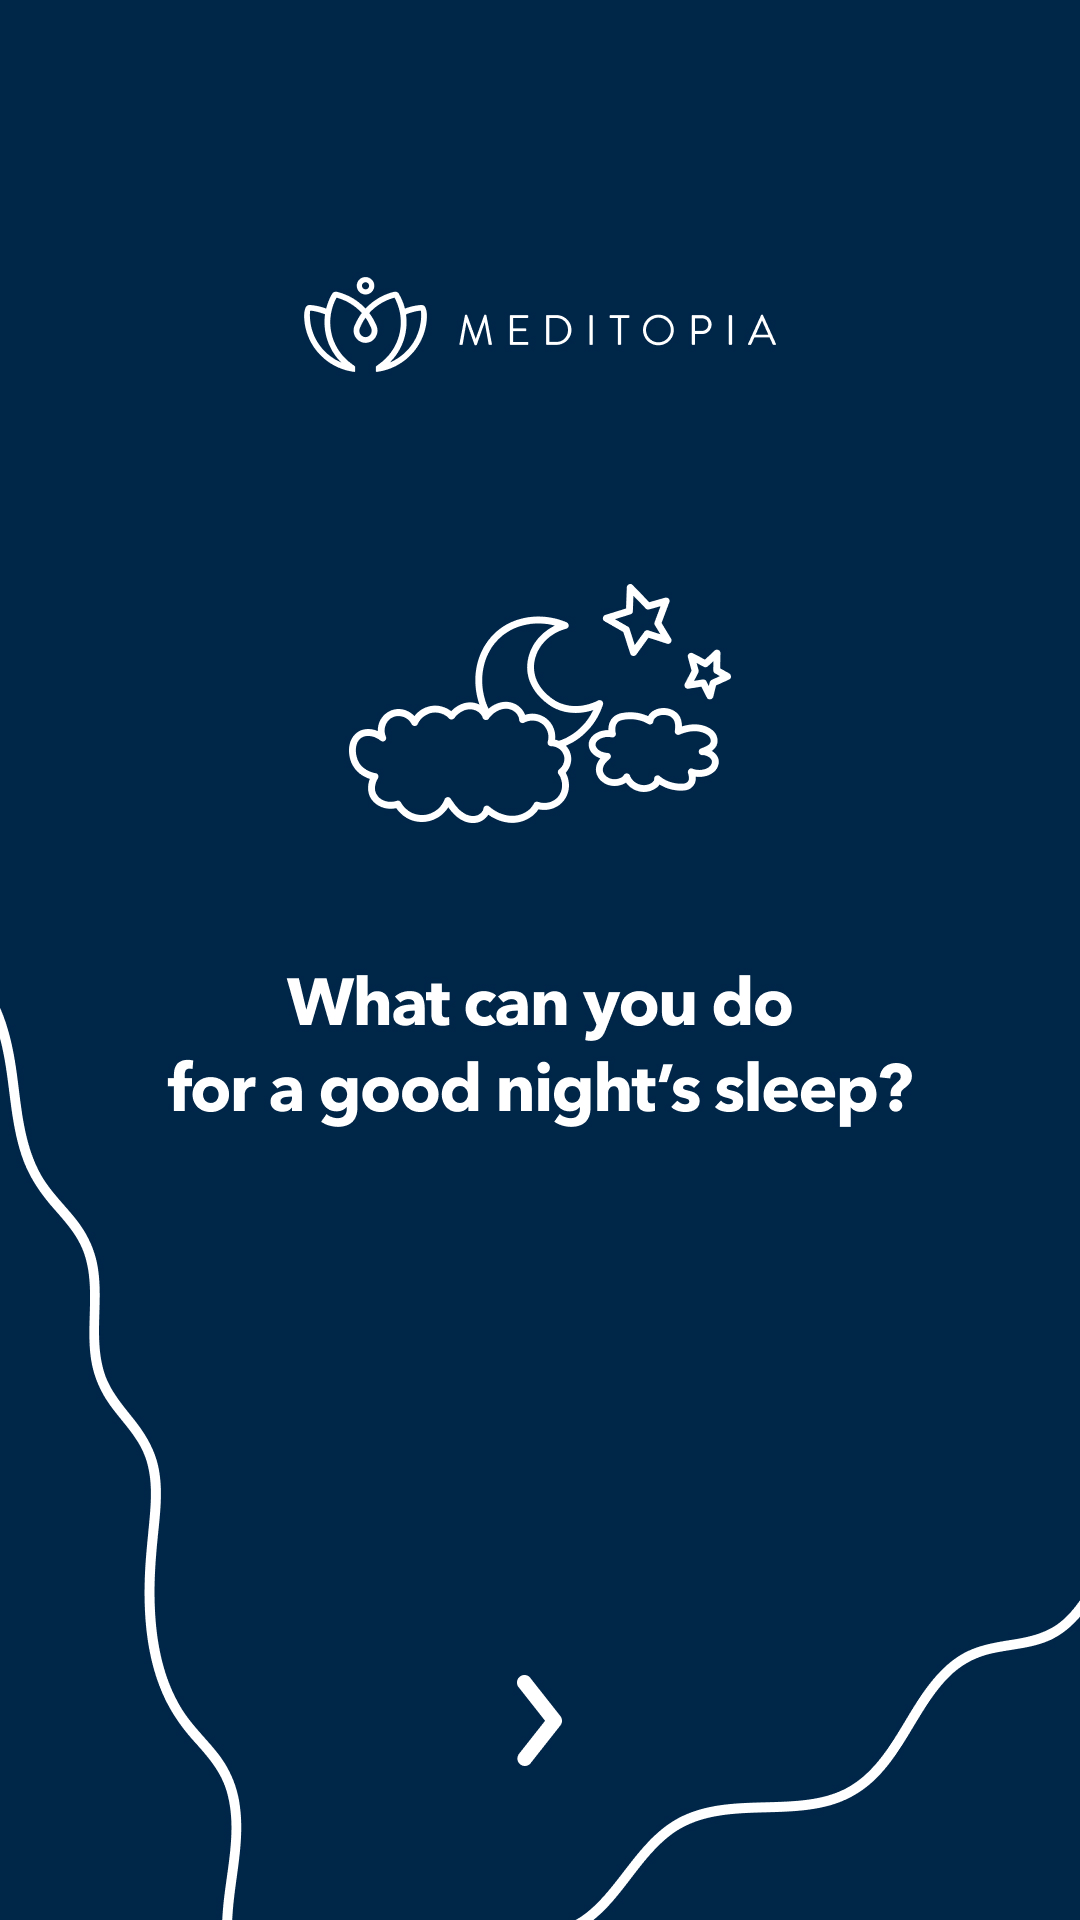 What can you do for a good night's sleep?